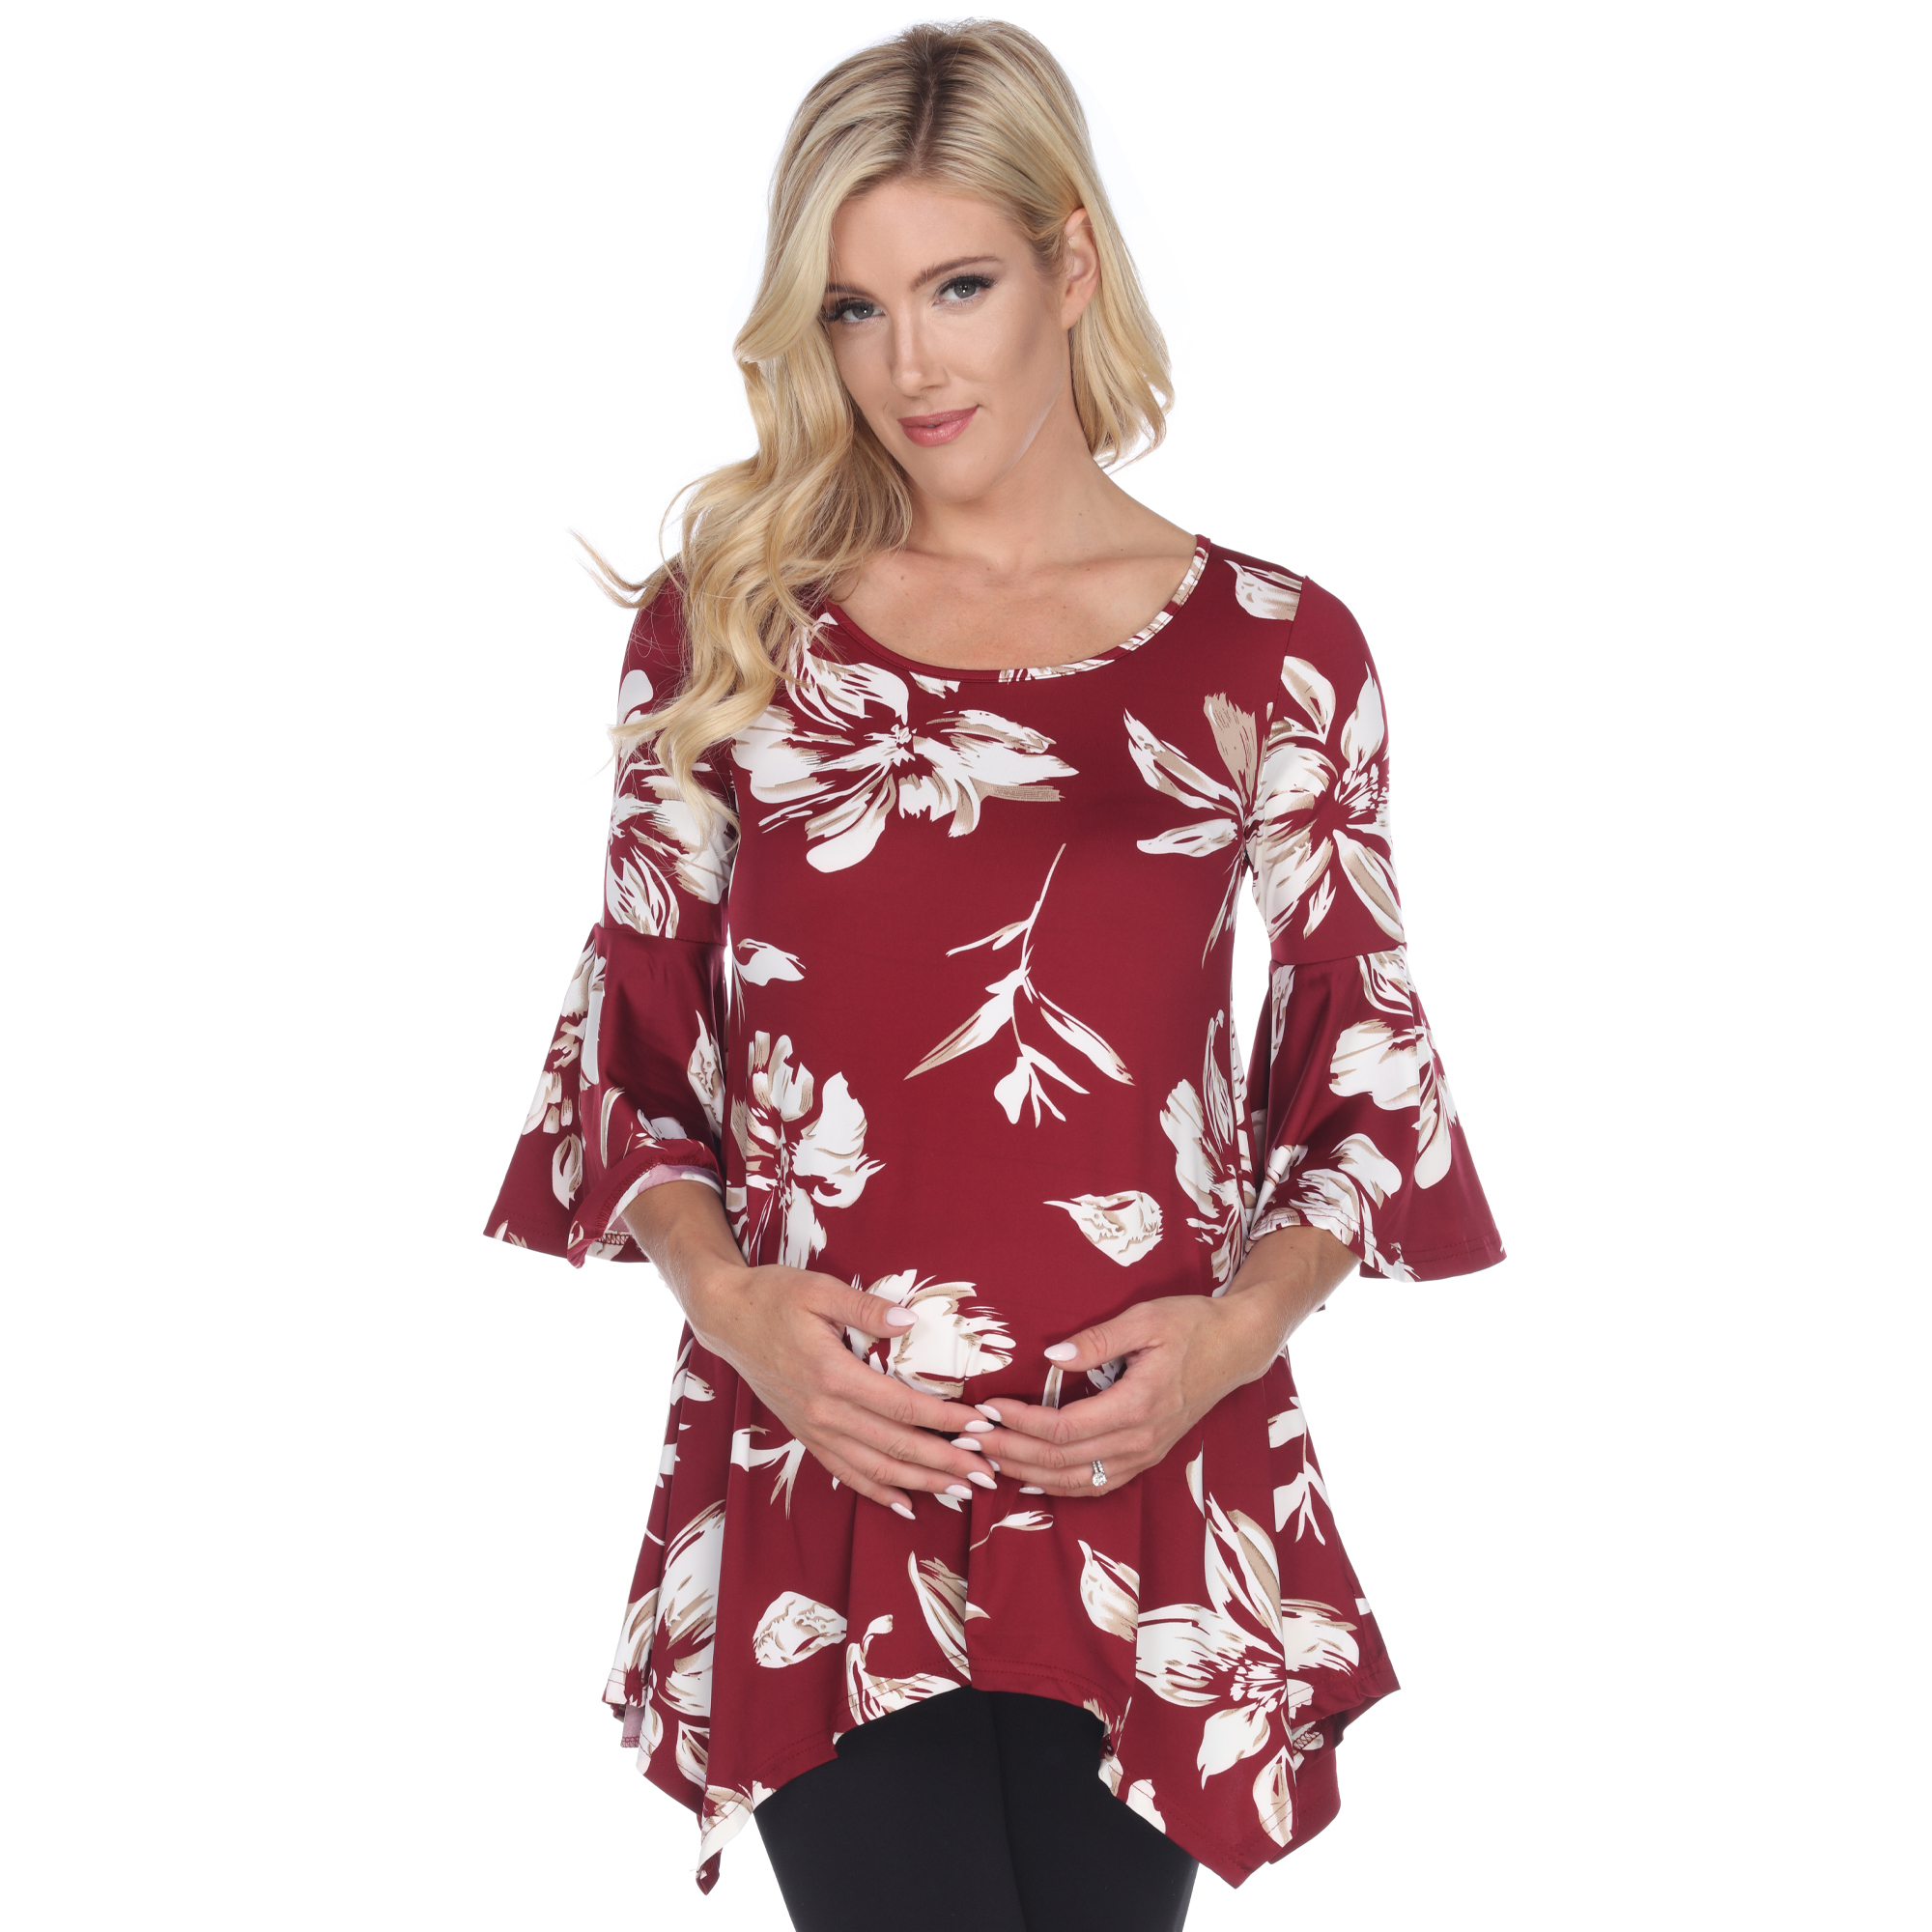 White Mark Women's Maternity Floral Print Quarter Sleeve Tunic Top With Pockets - Red, 3X